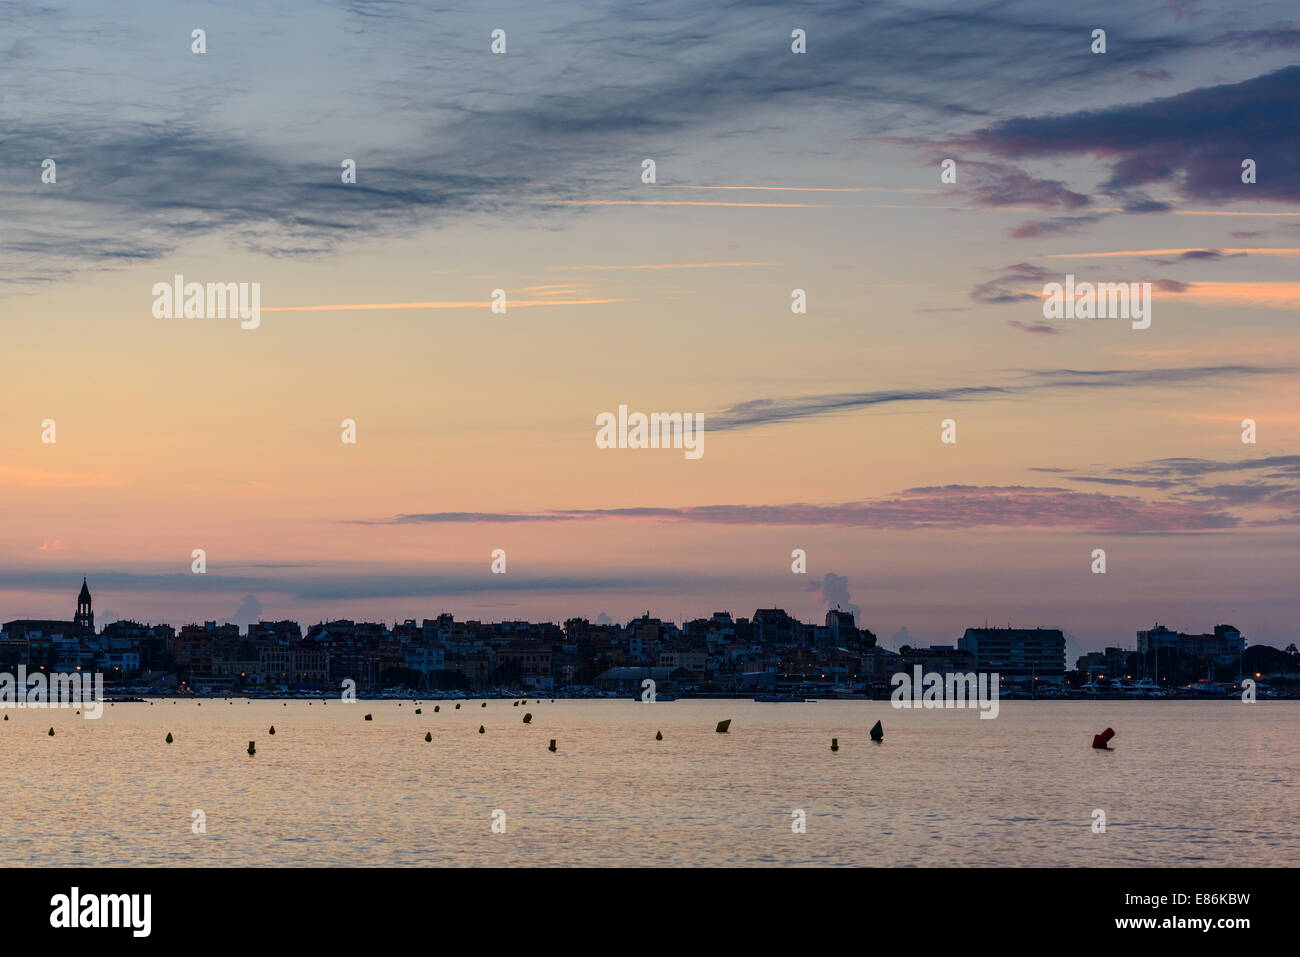 Photograph of a Catalan Village by the Mediterranean sea, taken at sunrise. Stock Photo